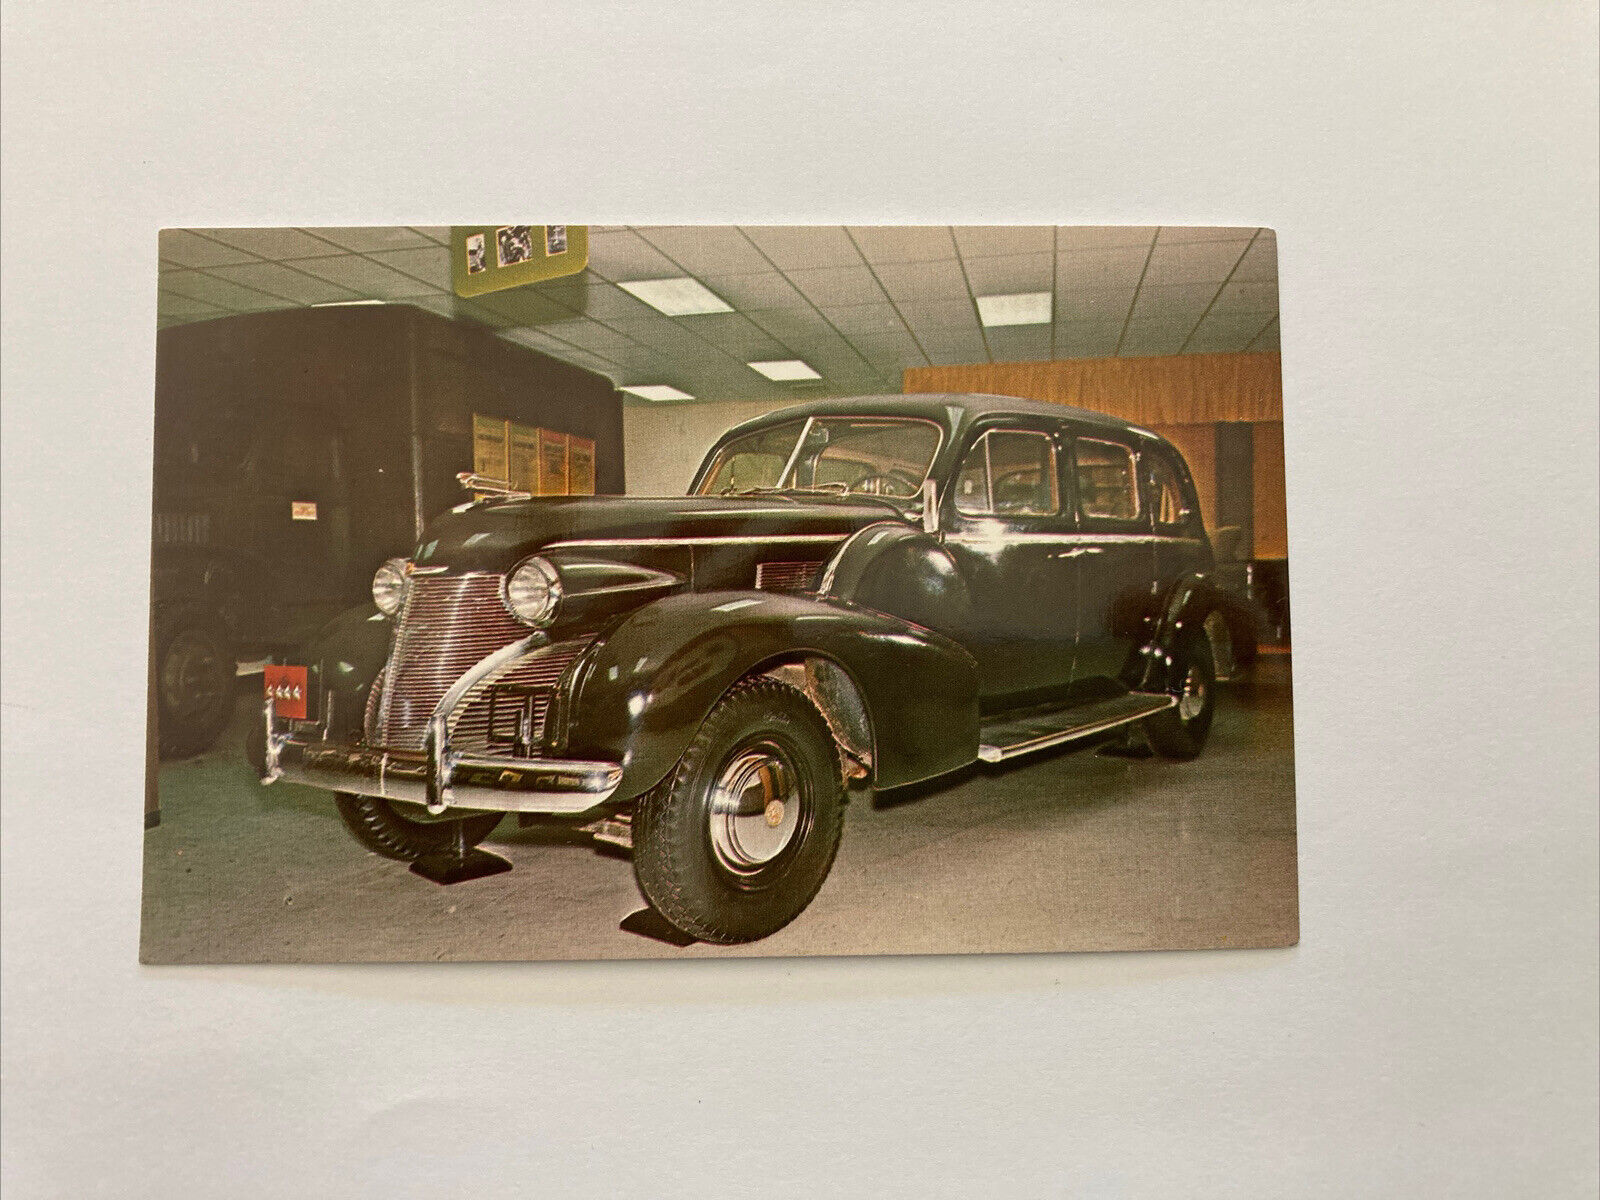 1939 Cadillac, General George Patton Fort Knox, Kentucky Patton Museum Postcard